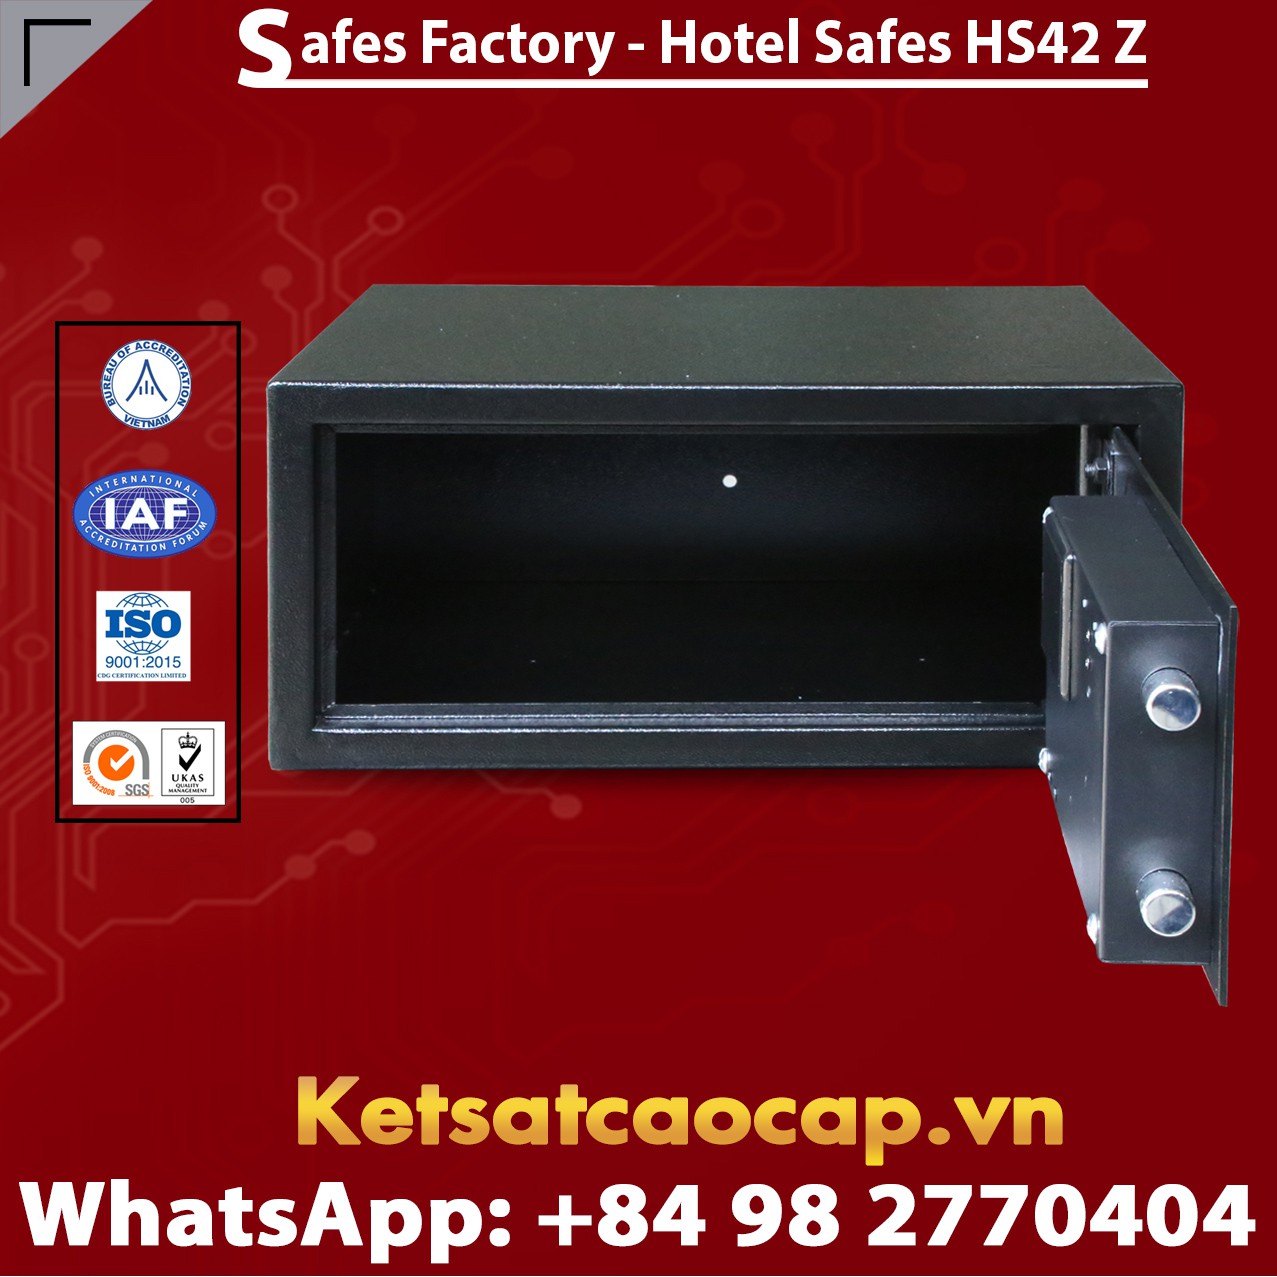 Hotel Safe High Quality Factory Price cao cấp